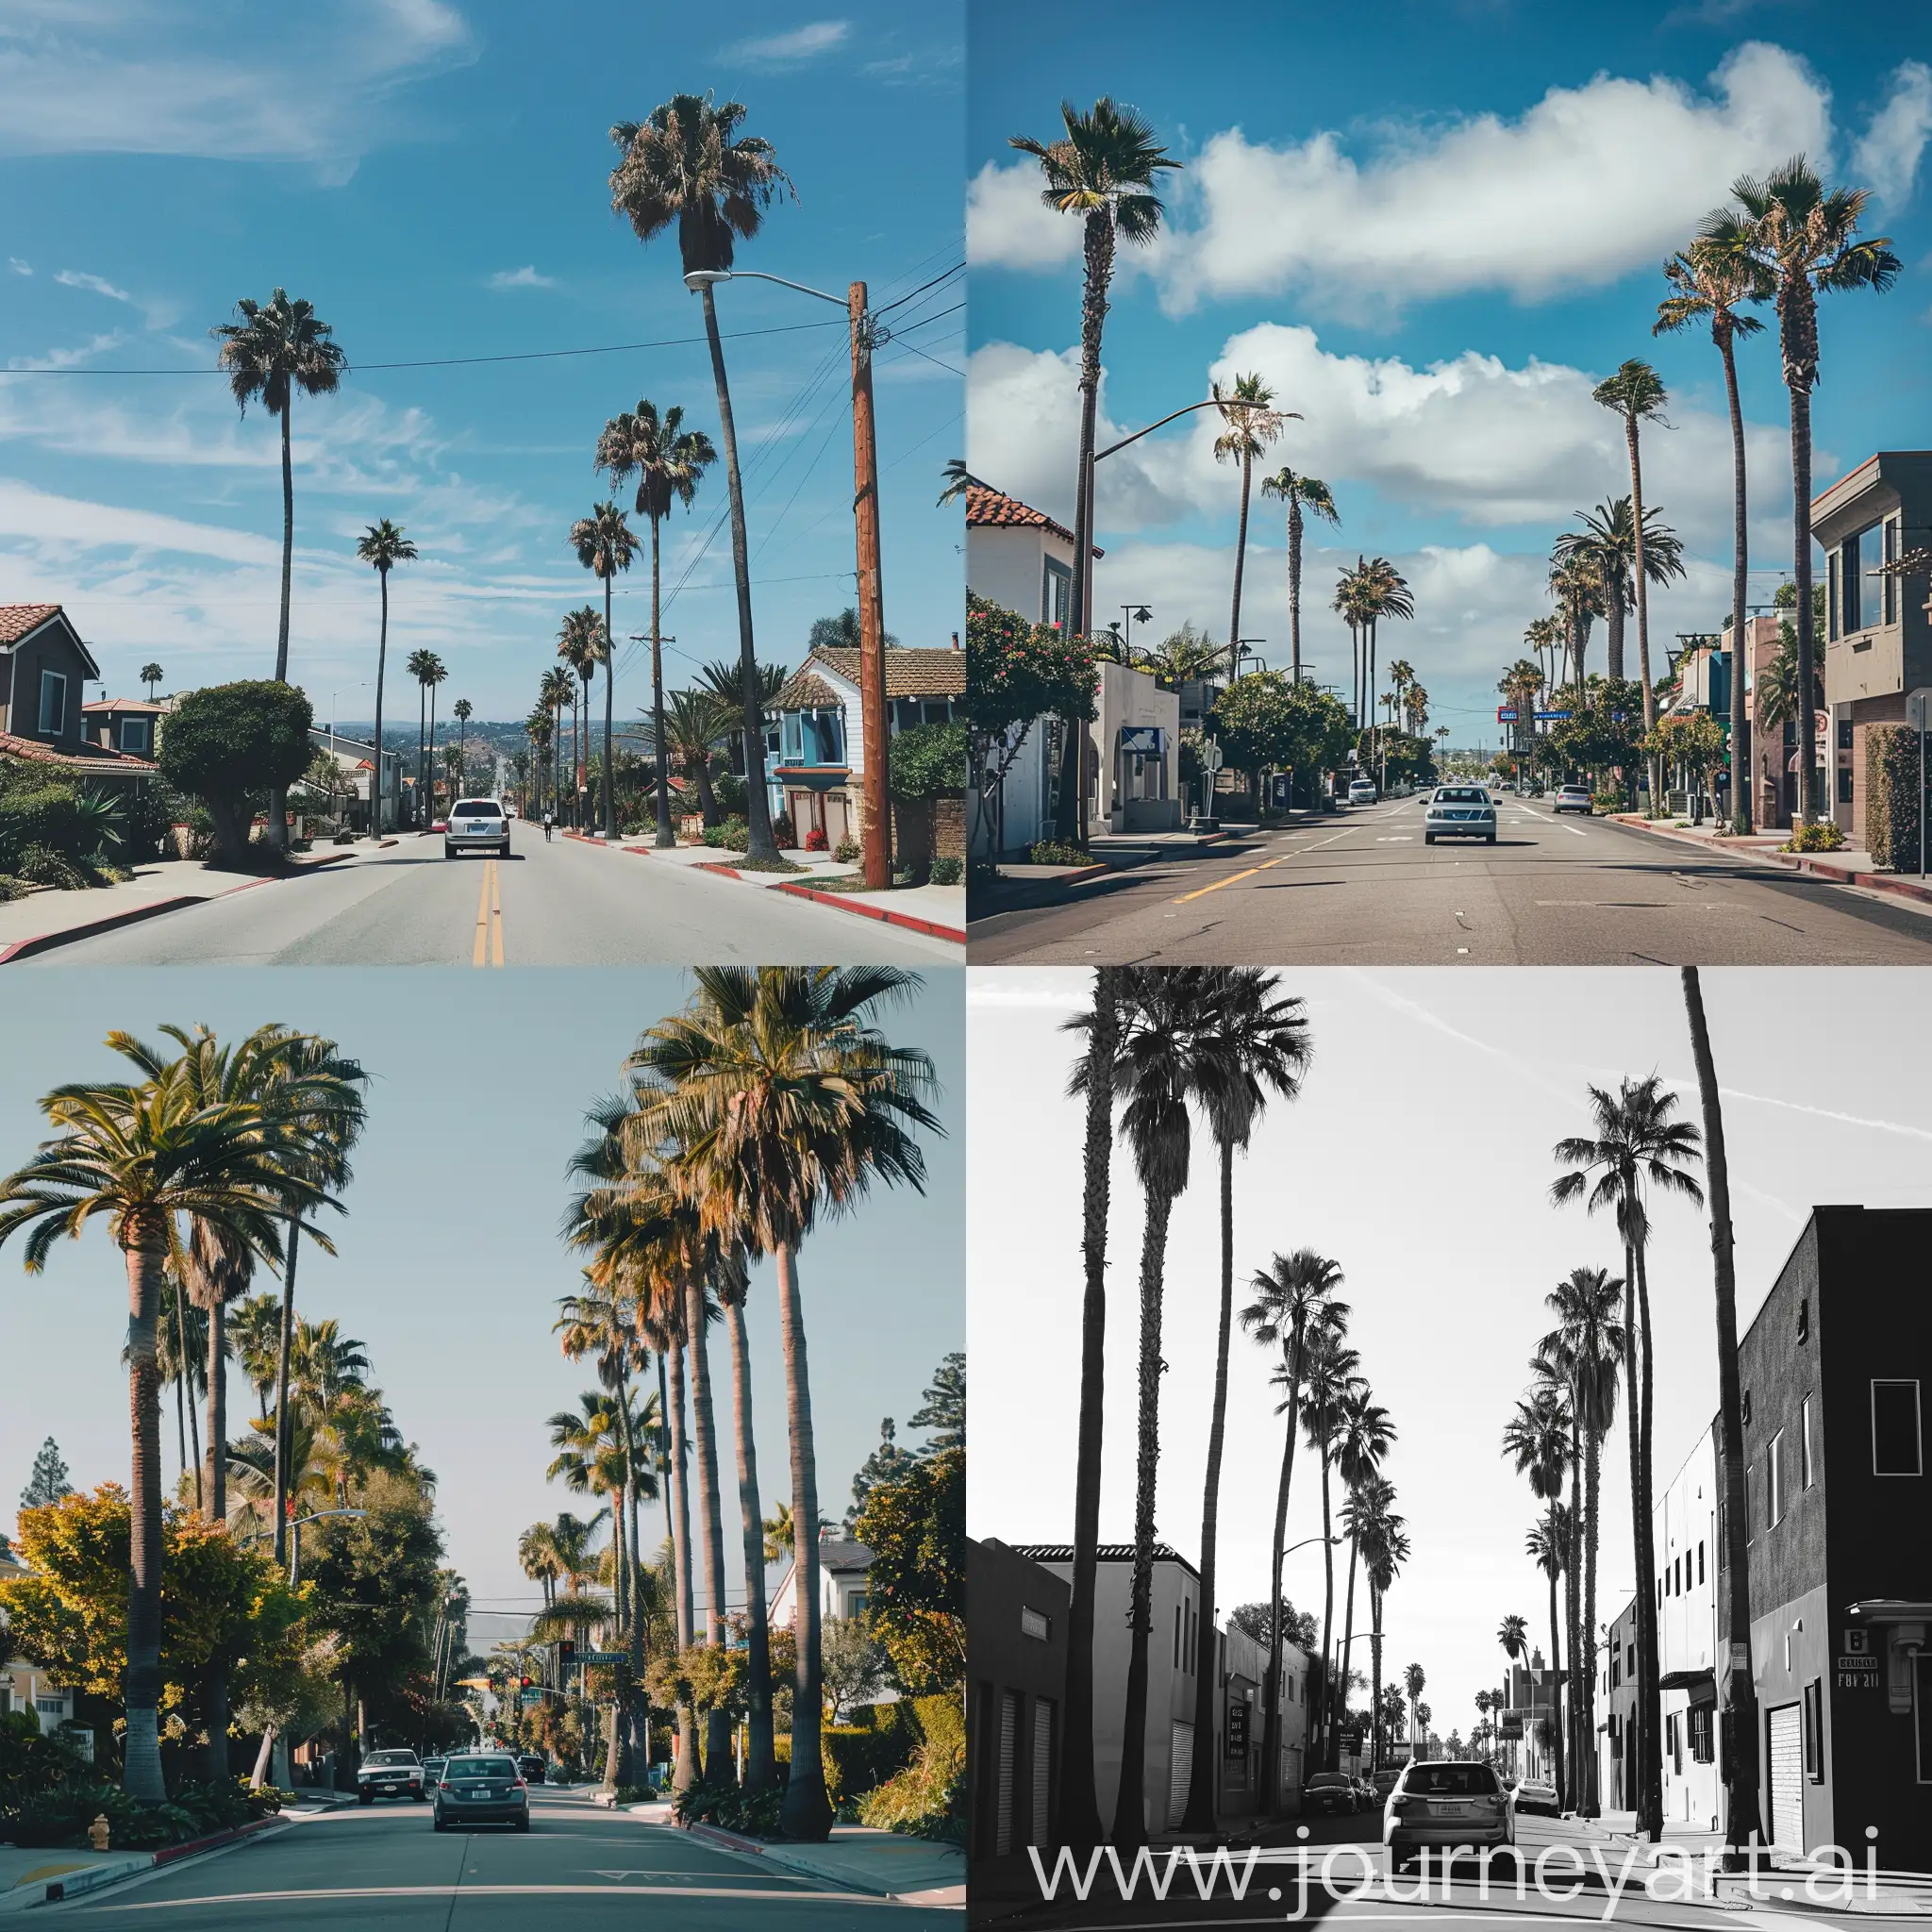 Street in the small city in California. A car on the way and the palms on the street